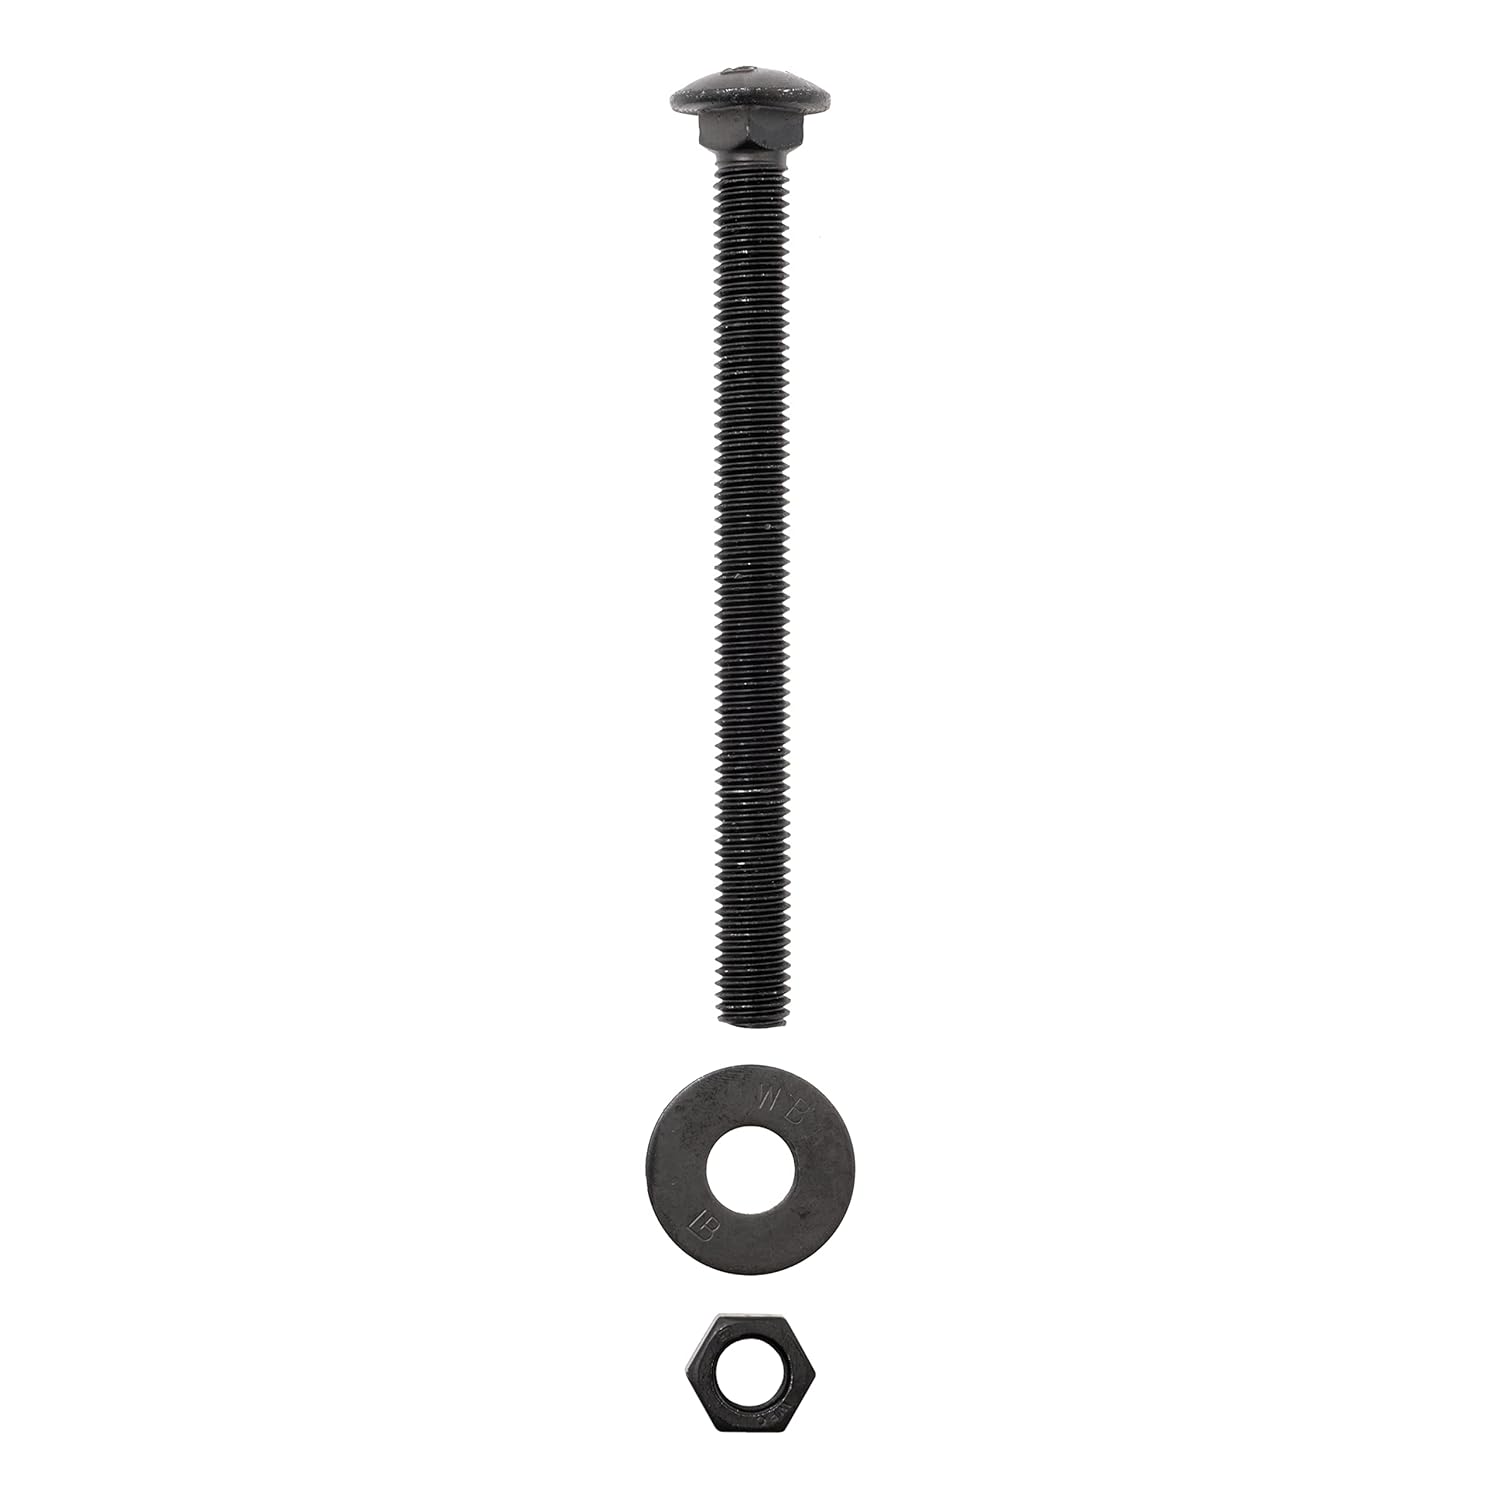 Generic 1/2 in. x 6 in. Black Exterior Carriage Bolt Kit Includes 12 Bolts, 12 Washers, and 12 Nuts, Ceramic Black Coated for Exterior